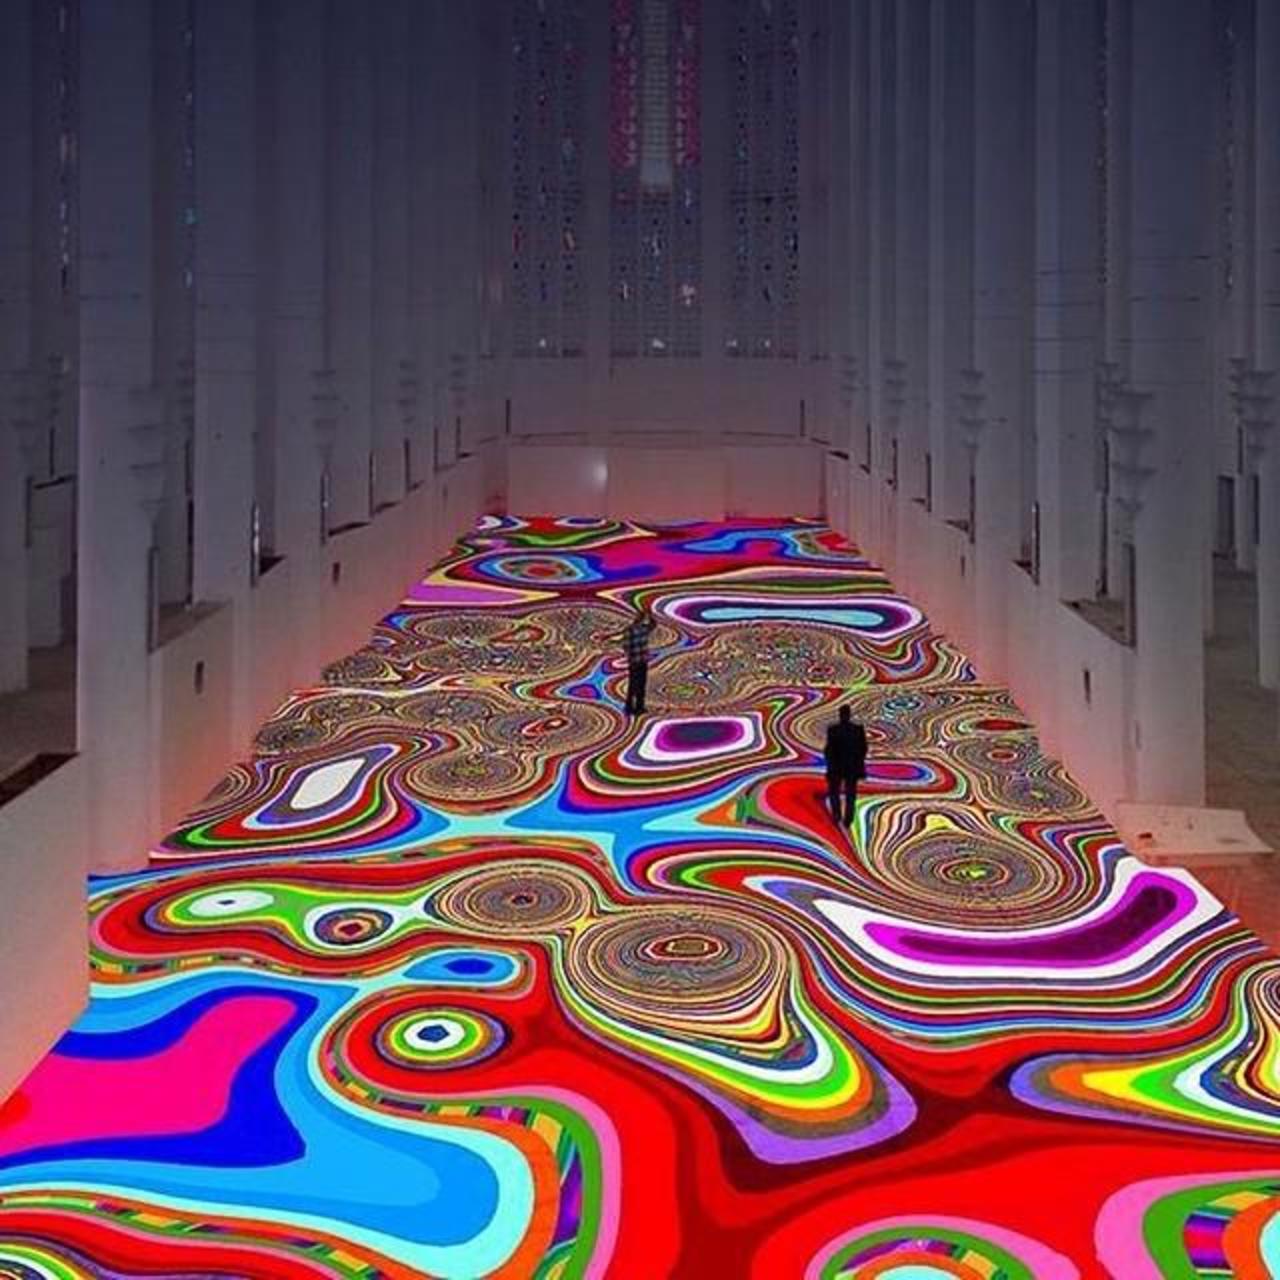 Venues take note This digital carpet by Miguel Chevalier is insane! #trippy #lightart #stayinspired #intotheam http://t.co/FgJMYYQpID